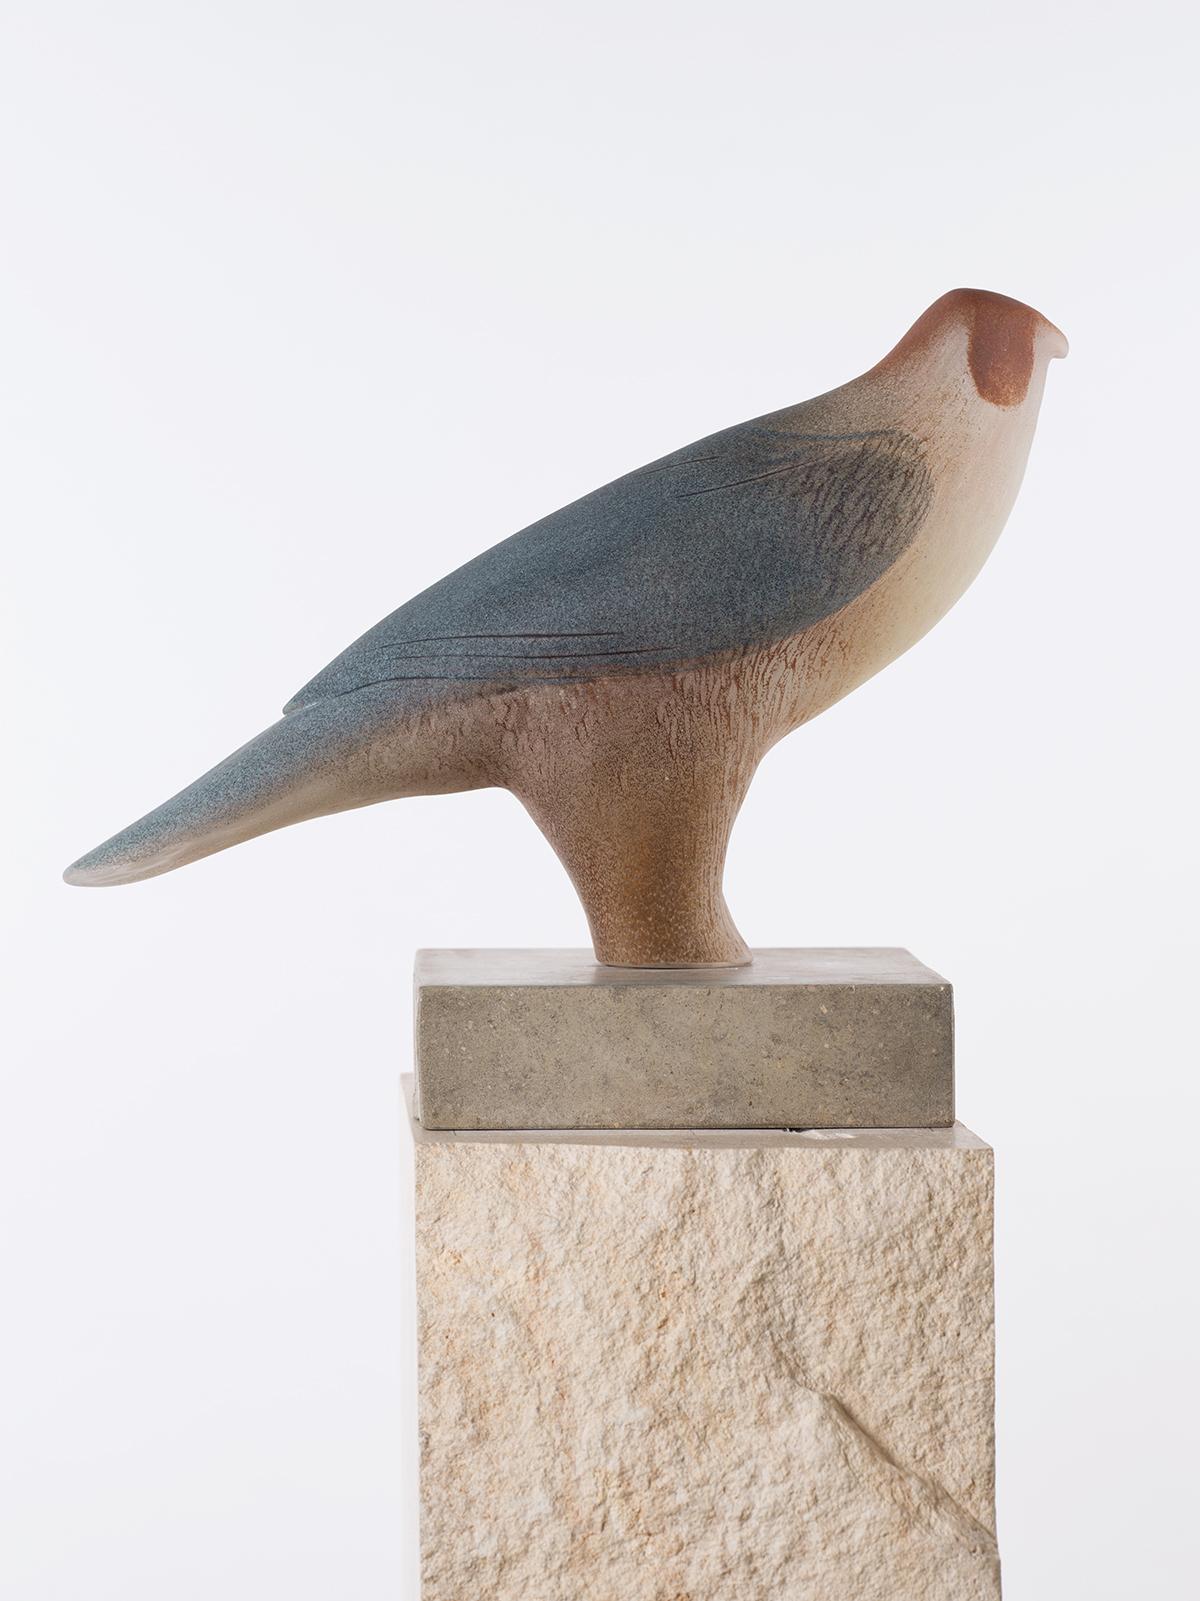 Hand blown, pigmented glass and carved limestone from the renowned studio of Jane Rosen. 

Bird:  10 x 15 x 5"
Top Limestone Base: 2 x 8 x 7"
Bottom Limestone Base:  48 x 10 x 8"
Total Dimension:  60 x 15 x 8"

Approximately  1,000 lbs. total (half